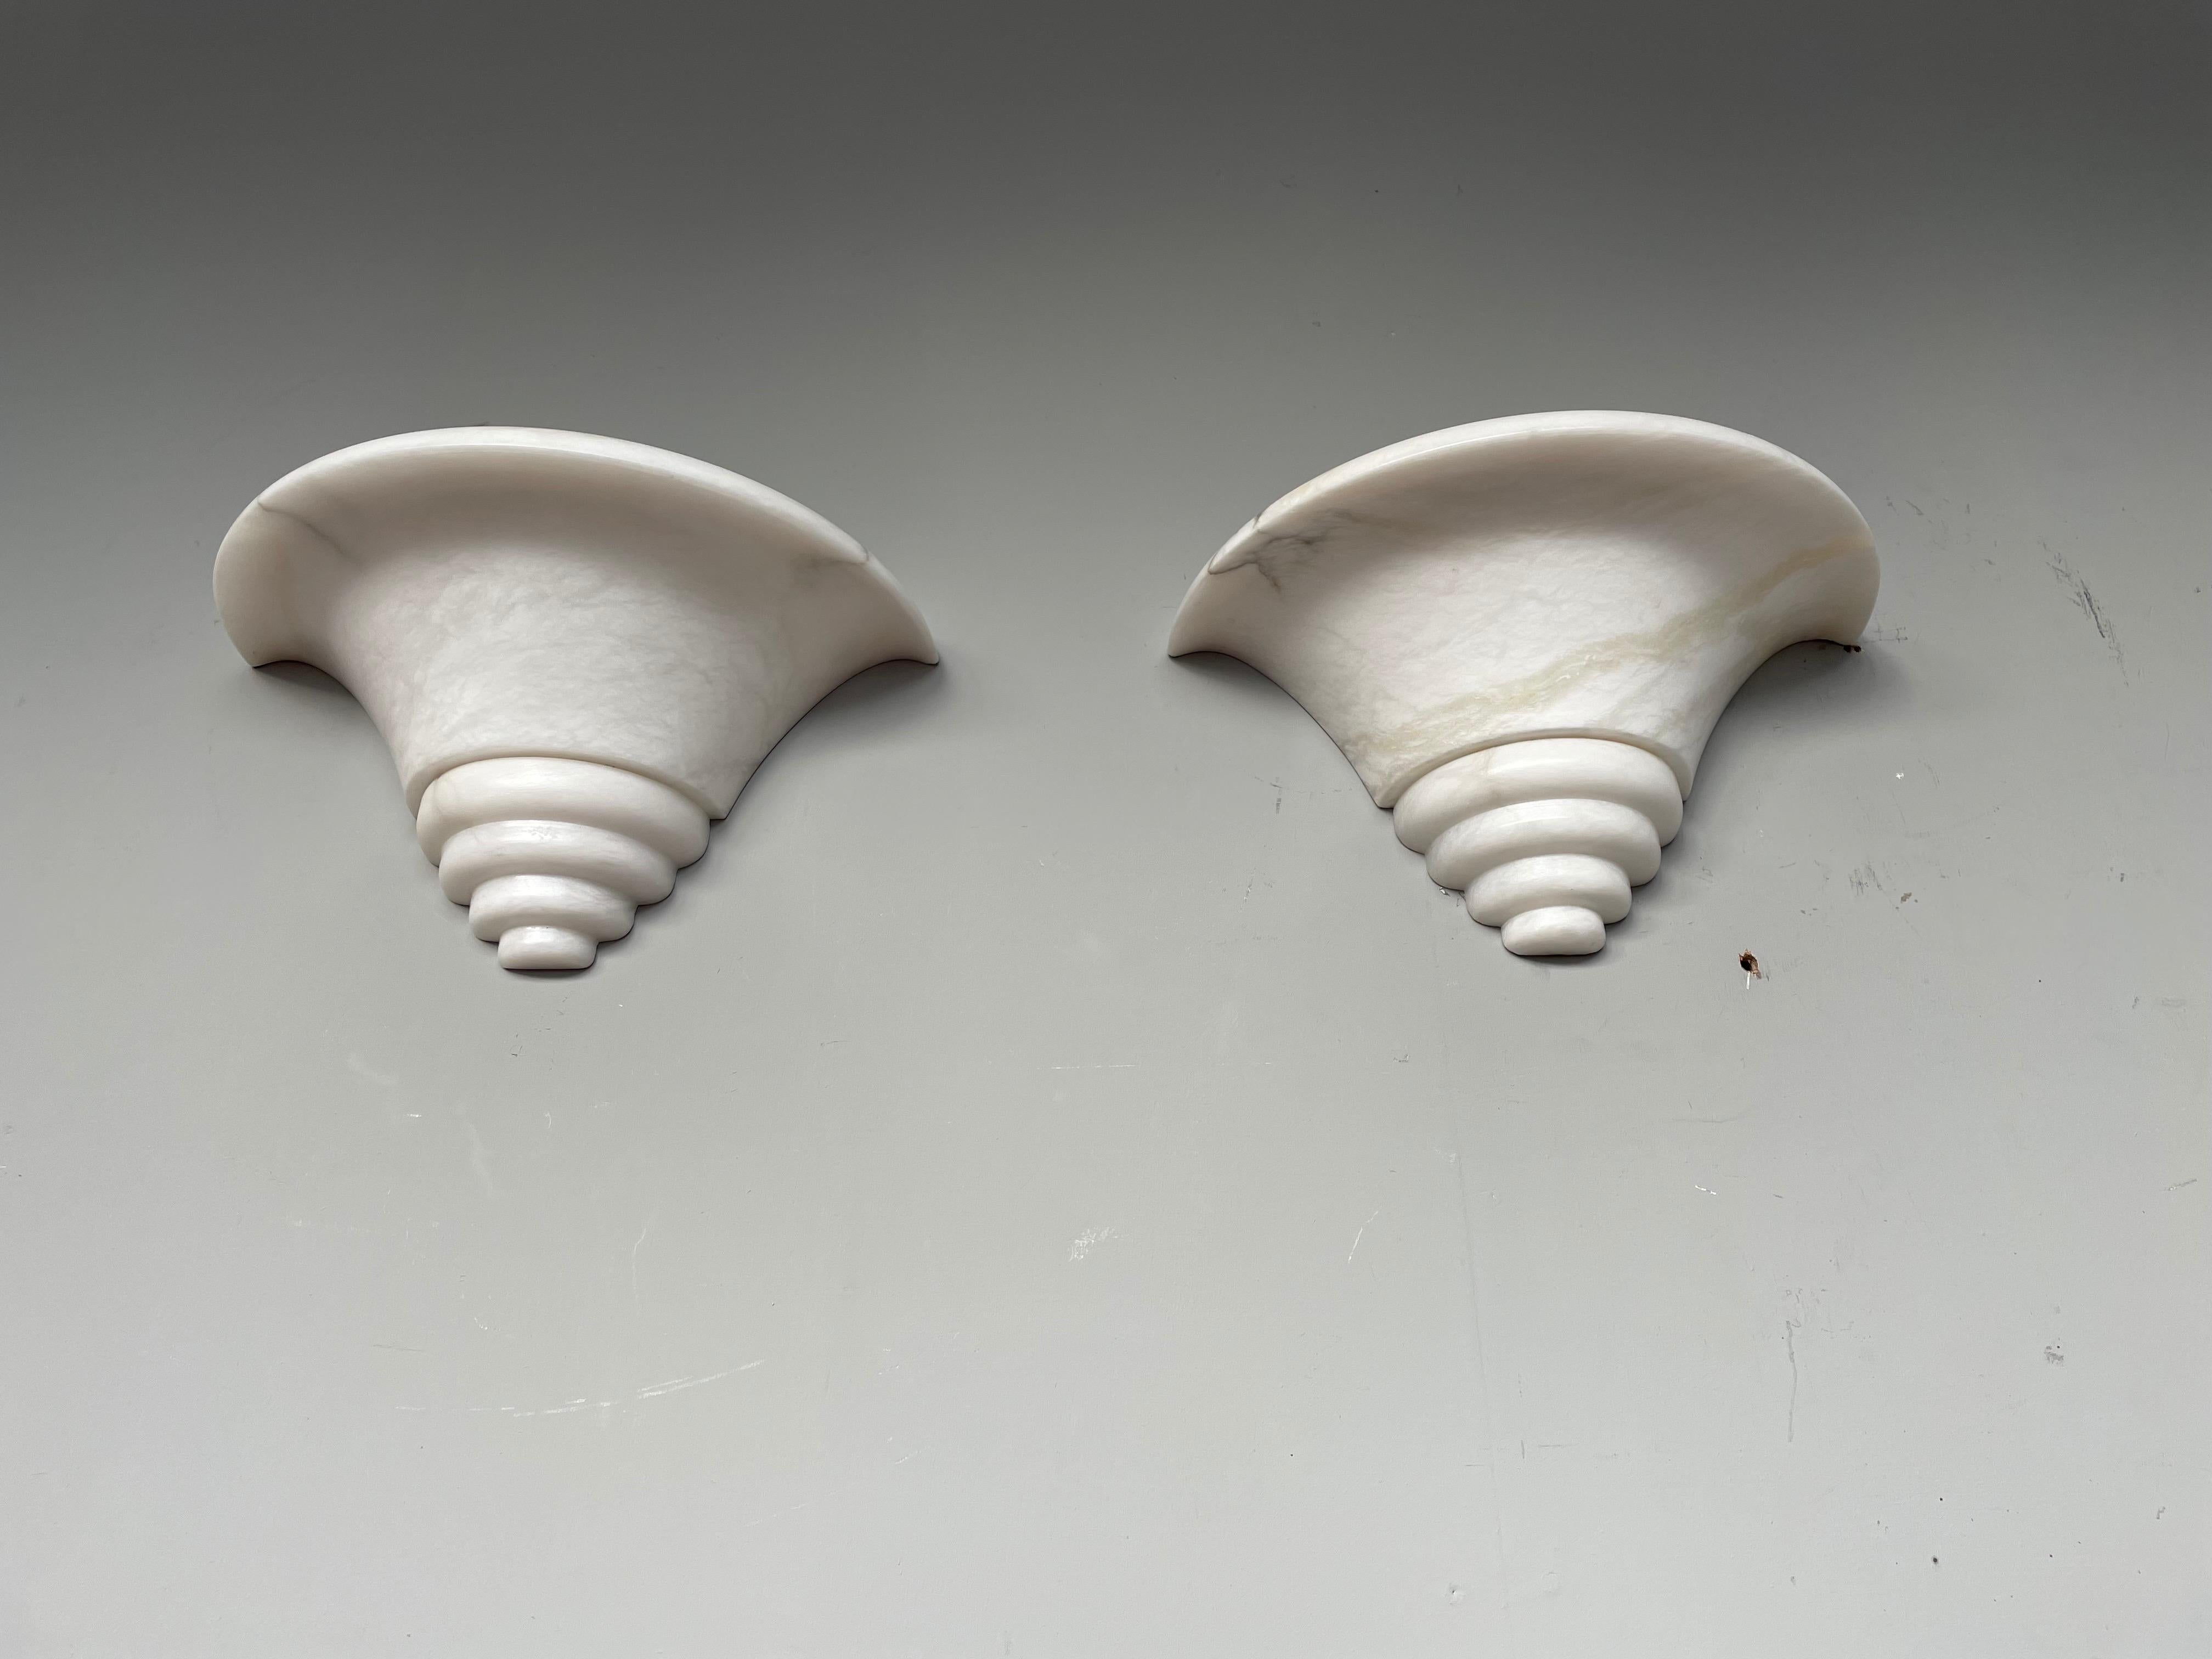 Exceptional Shape Midcentury Era Pair of Alabaster Wall Sconces Lamps / Lights For Sale 2